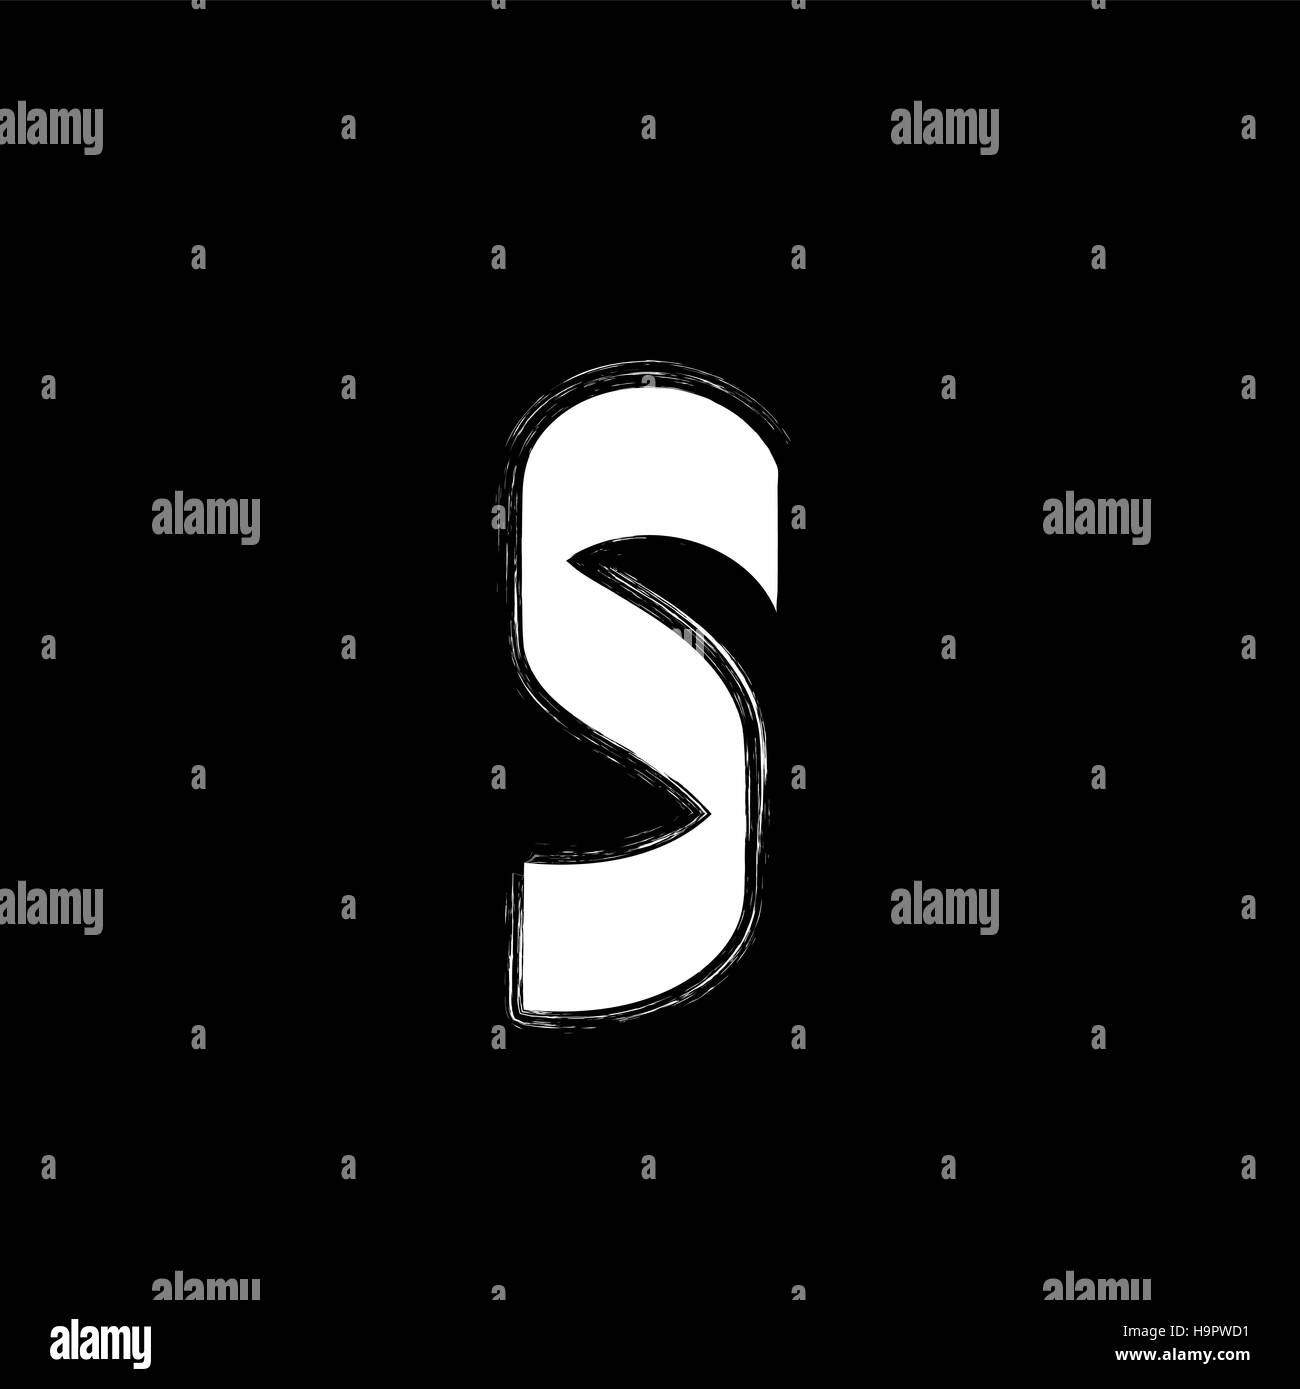 Isolated Graffiti Font Icon White Grunge Style Letter S On Black